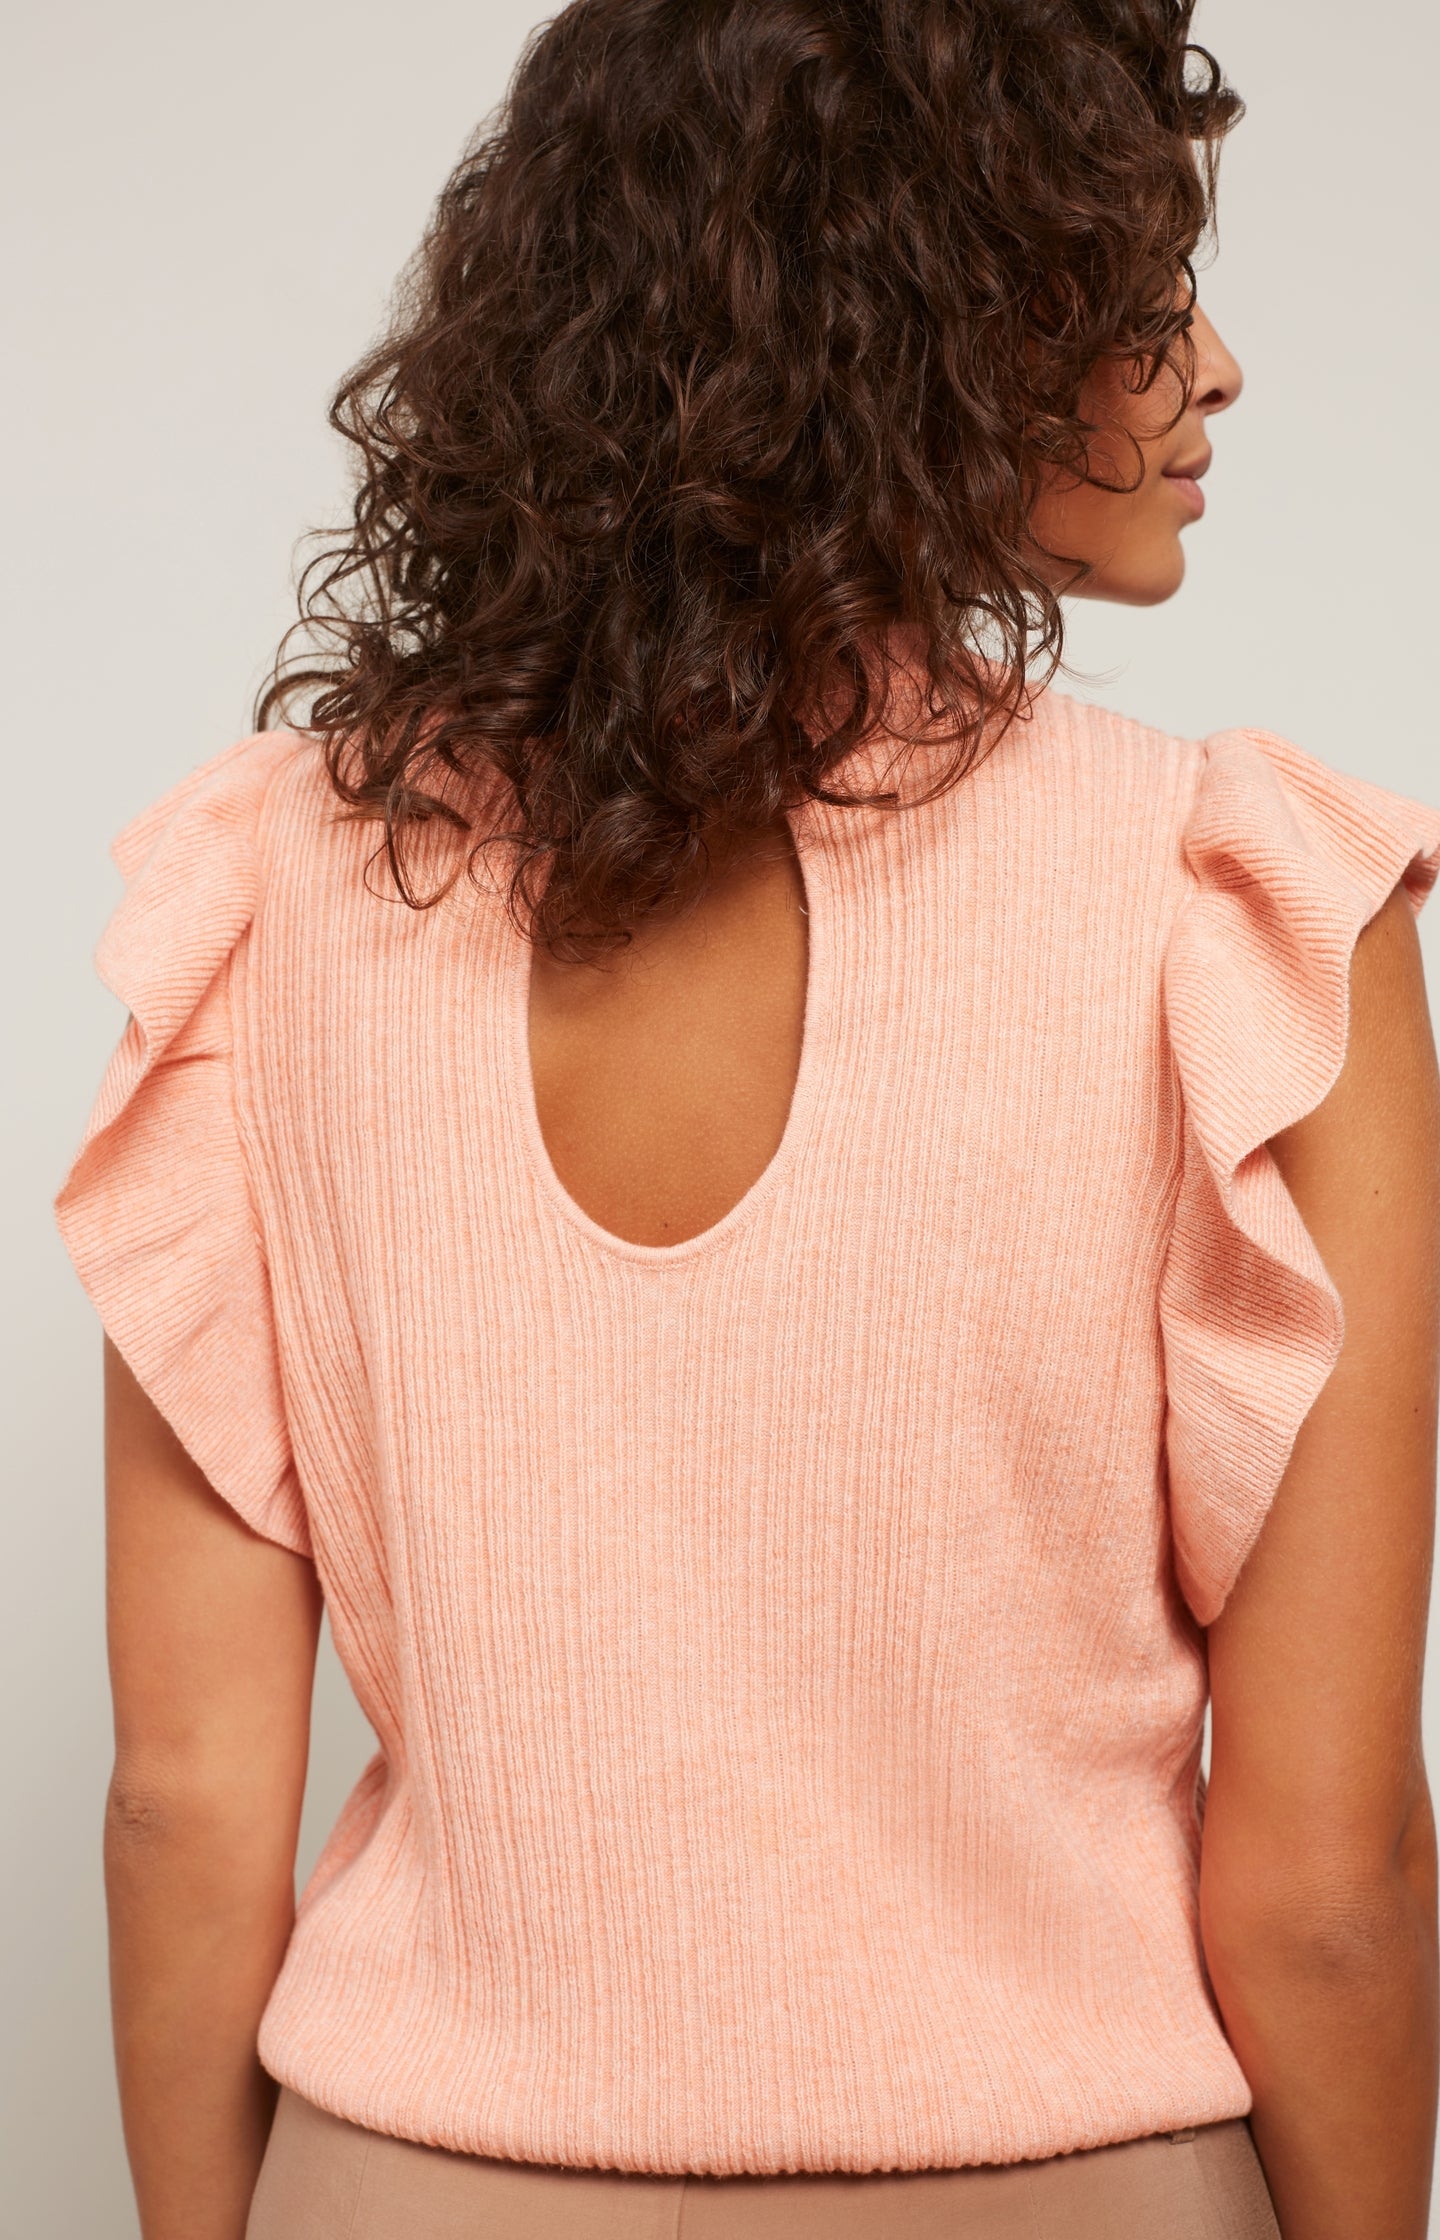 Sweater with round neck, ruffled cap sleeves and back detail